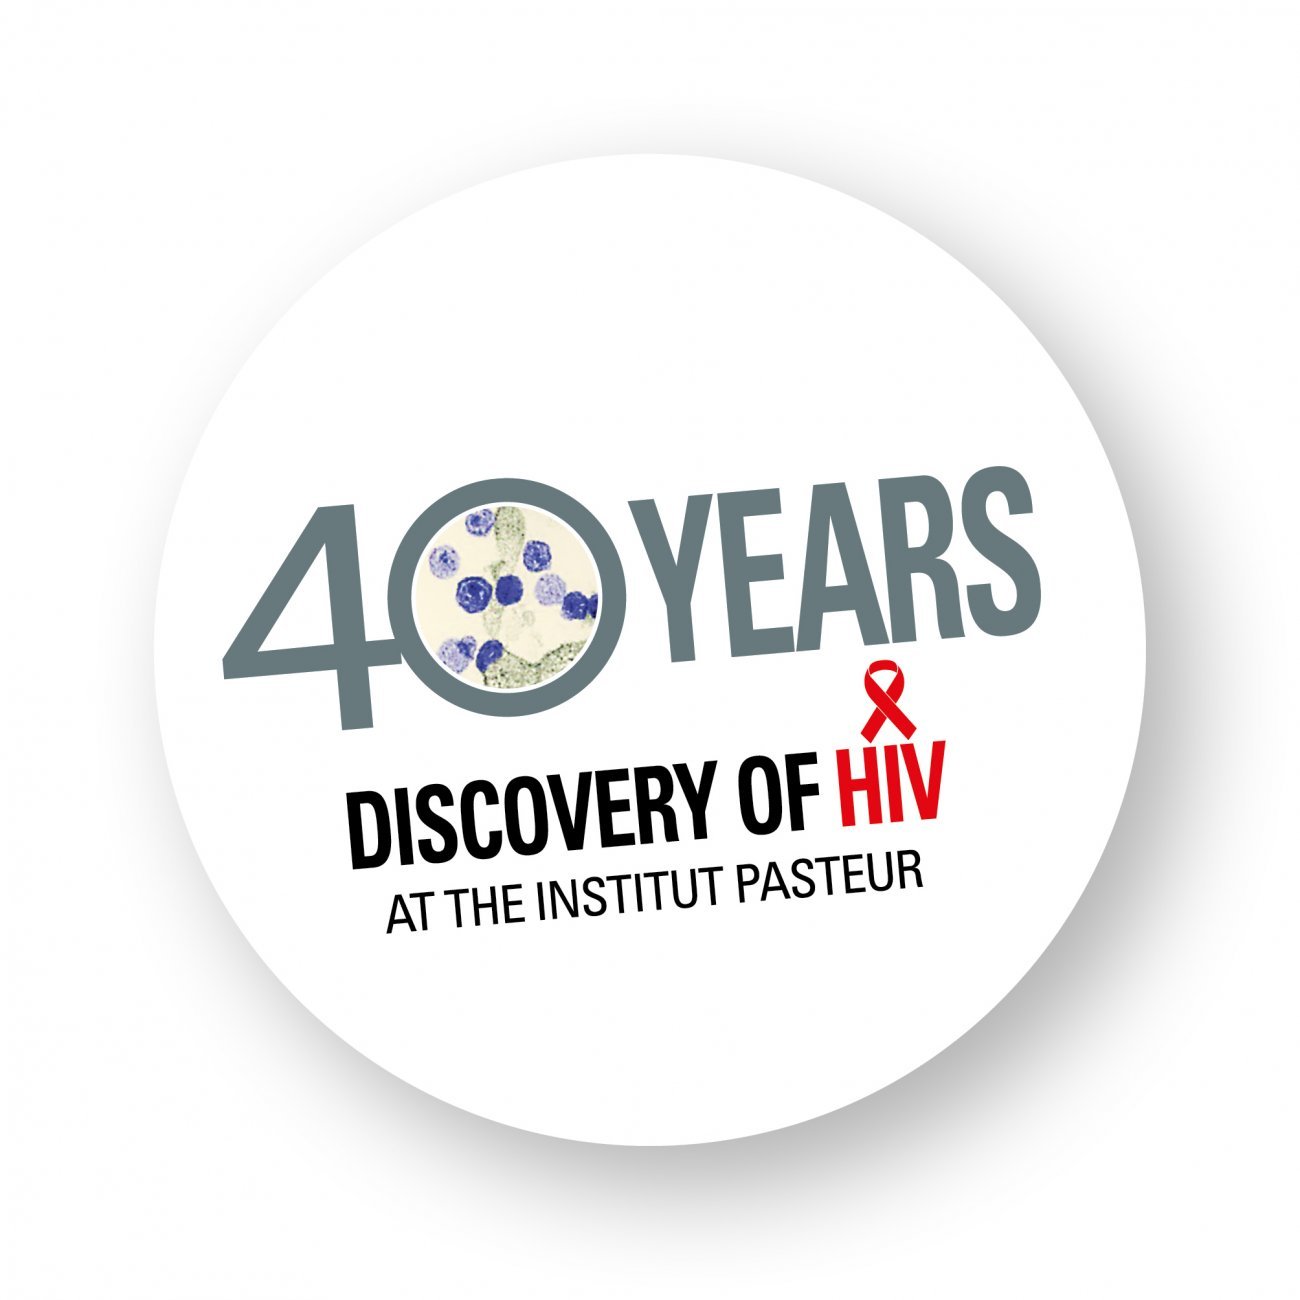 The 40 years of HIV label